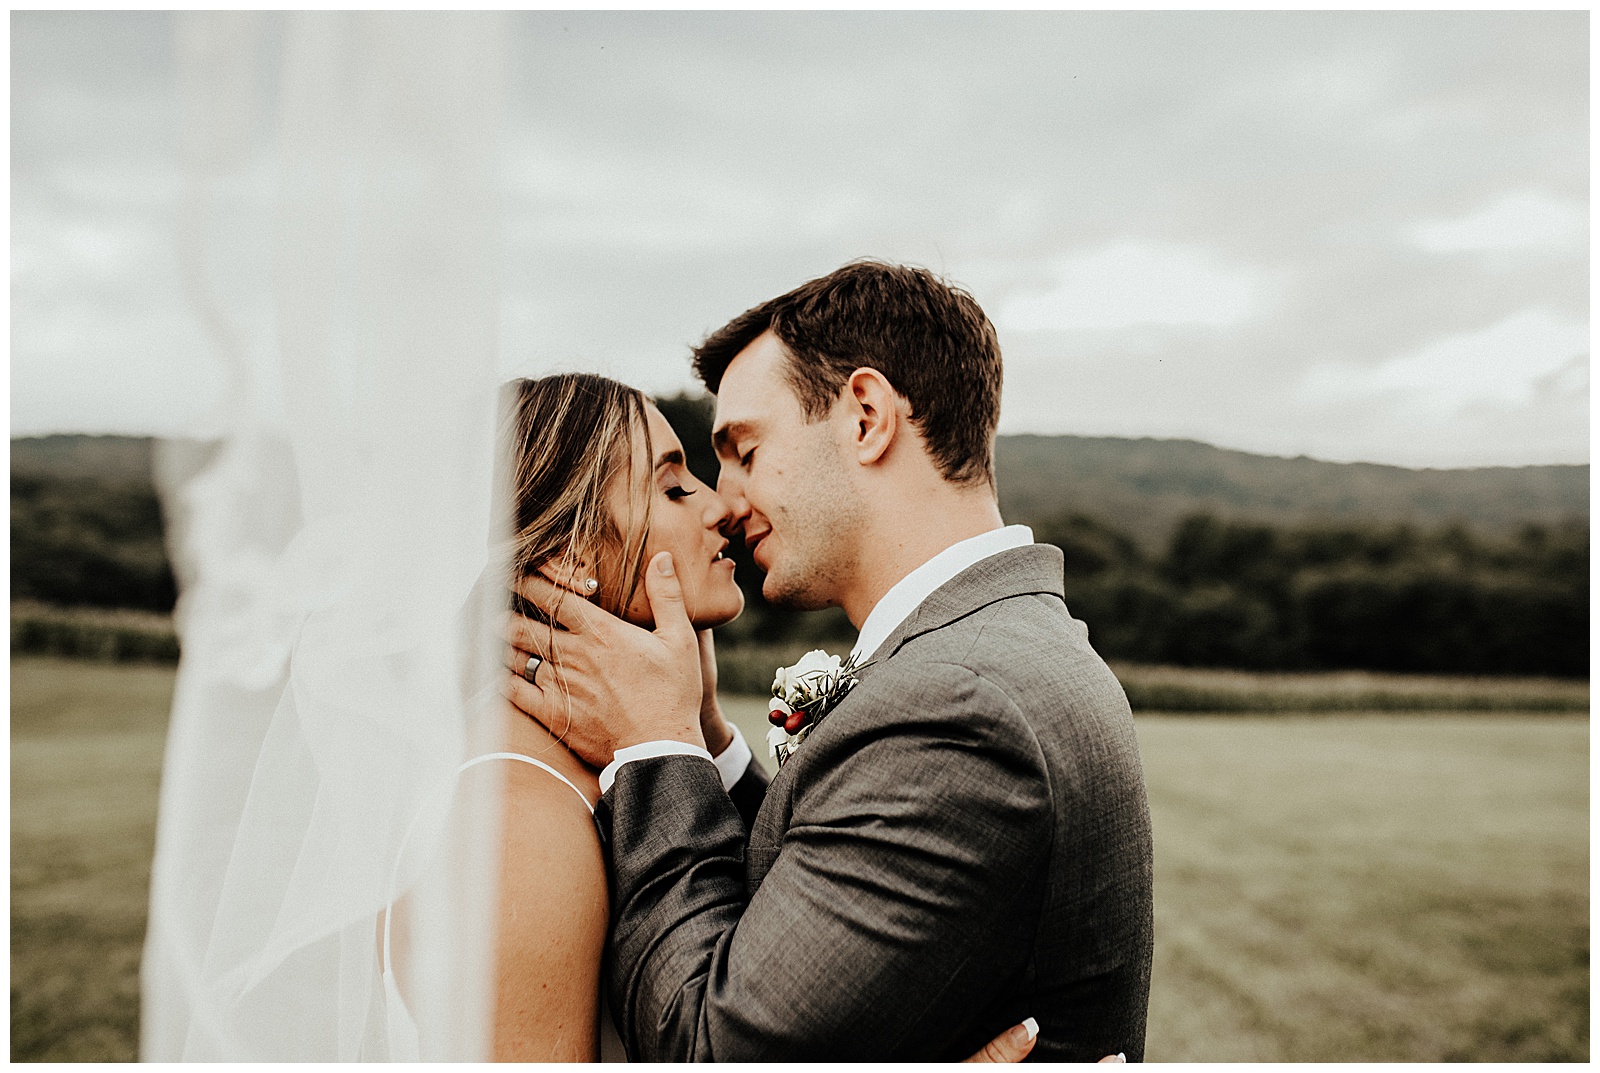 couples portraits intimate winery wedding in maryland captured by Brey Photo, delaware county photographer